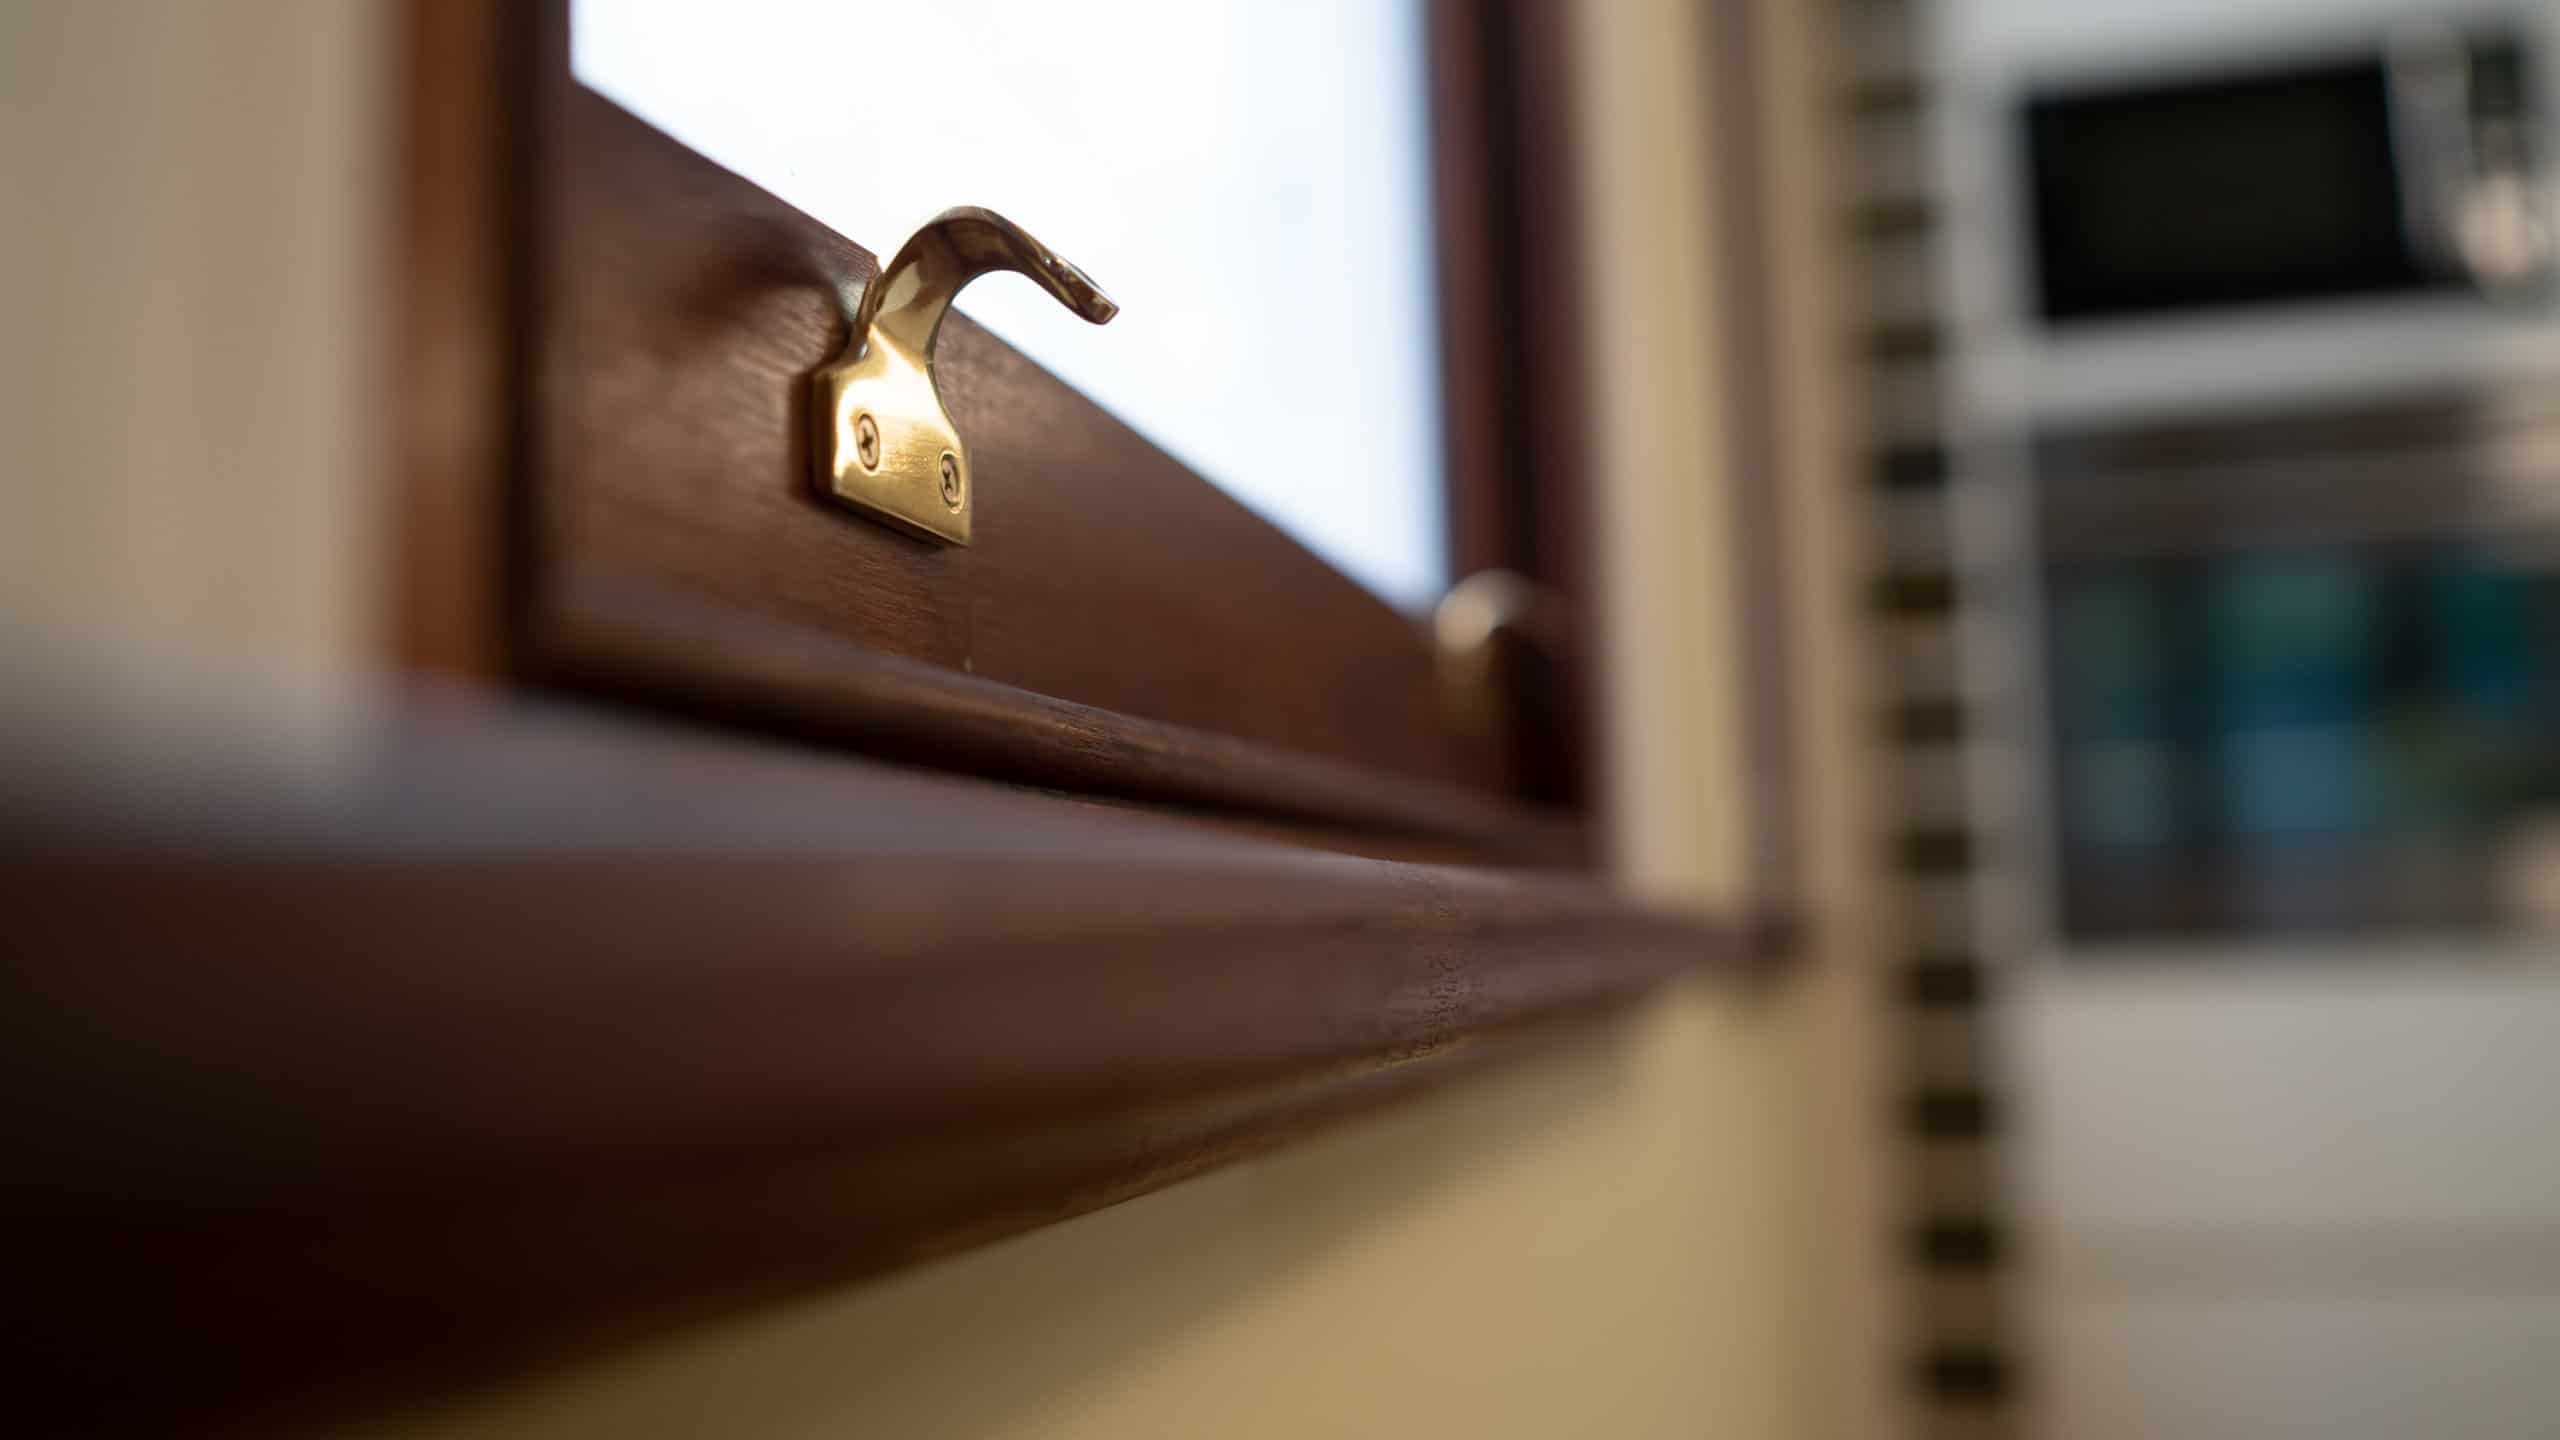 Close up picture of a wooden window frame & sill with brass handles